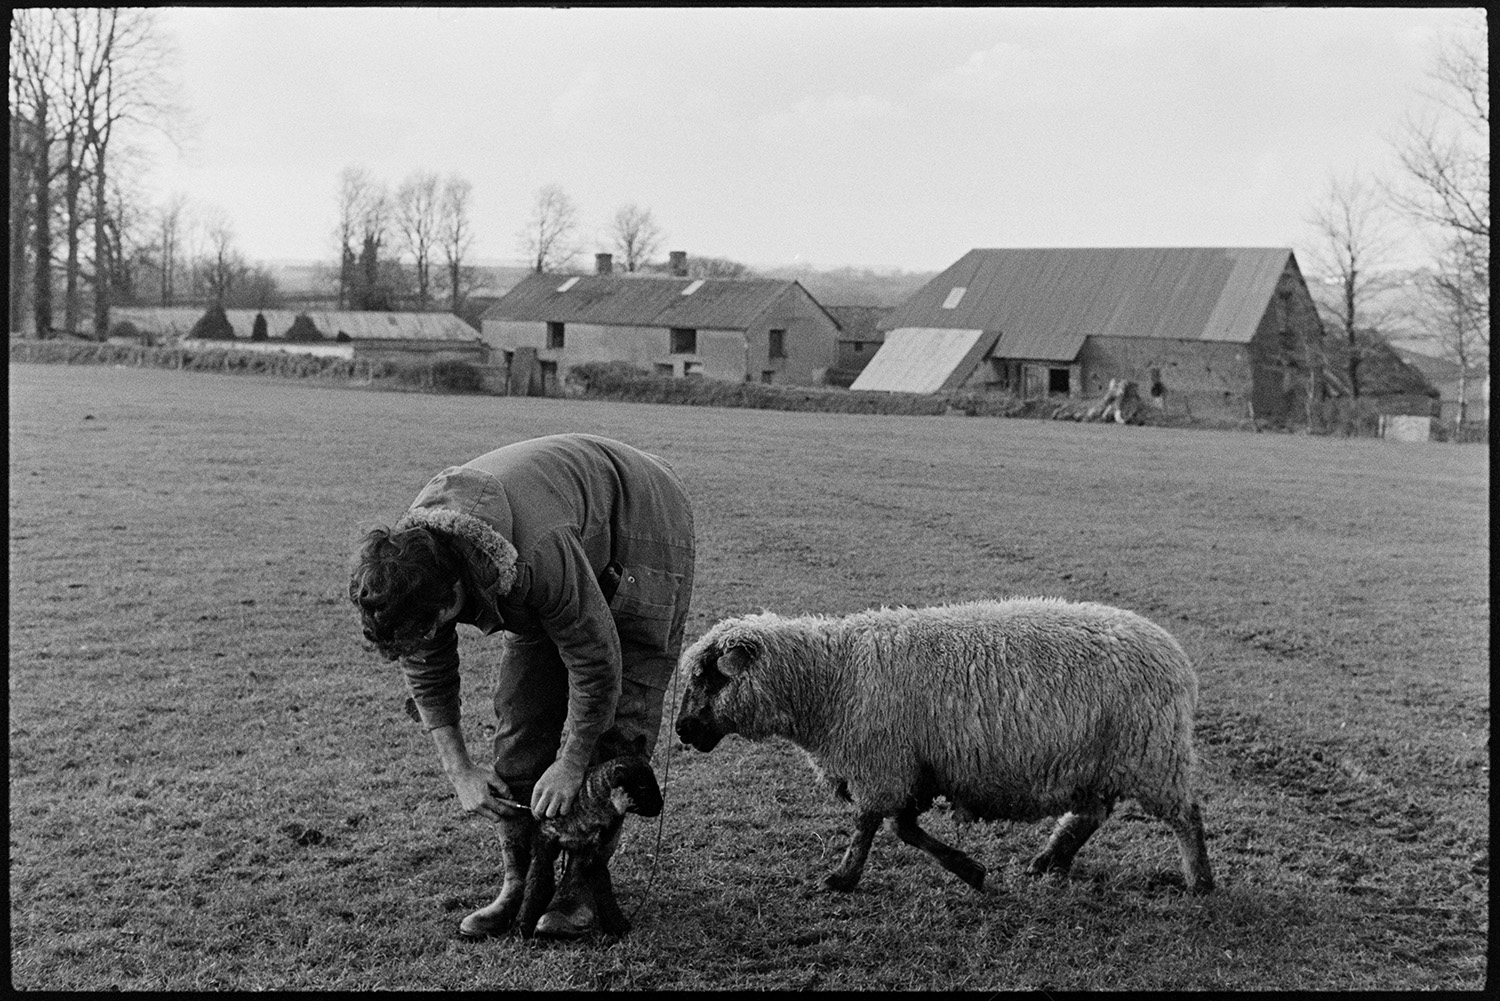 Farmer feeding lambs with milk in field and barn. 
[Graham Ward checking a lamb in a field at Parsonage, Iddesleigh. The ewe is stood next to him and various farm buildings and barns can be seen in the background.]